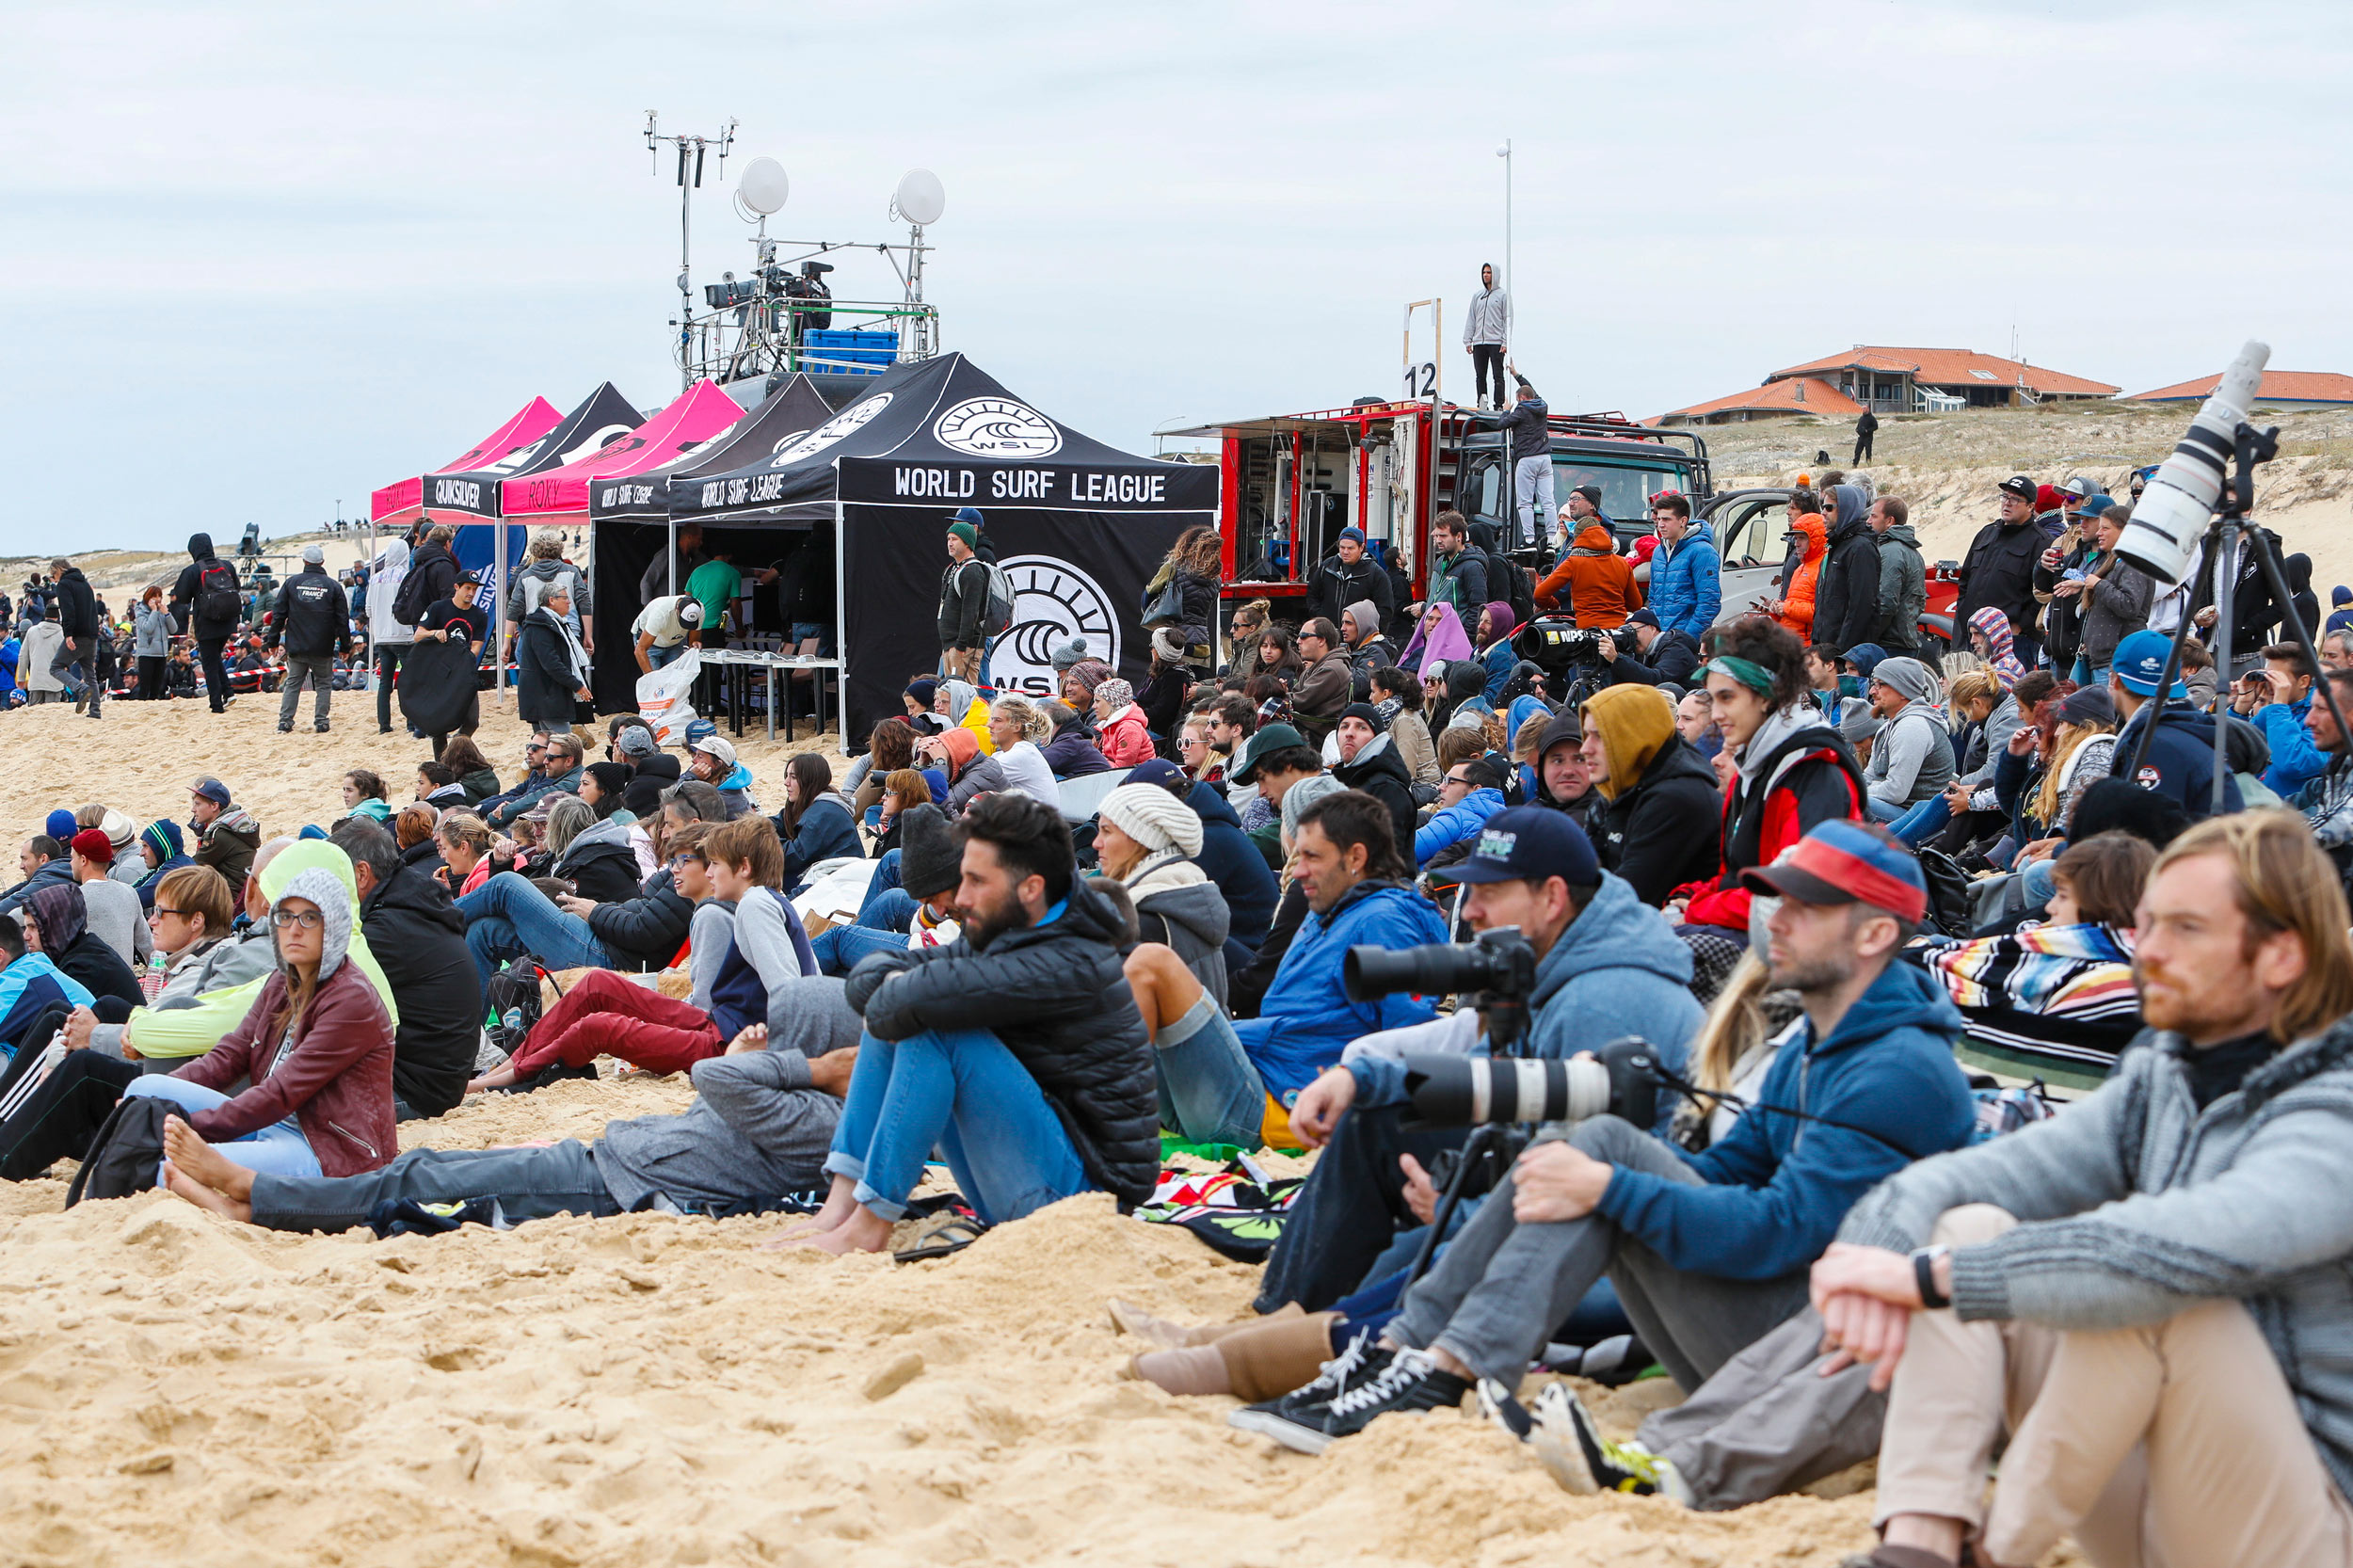 Tyler Wright and Carissa Moore Make Waves on Finals Day at the #ROXYpro France